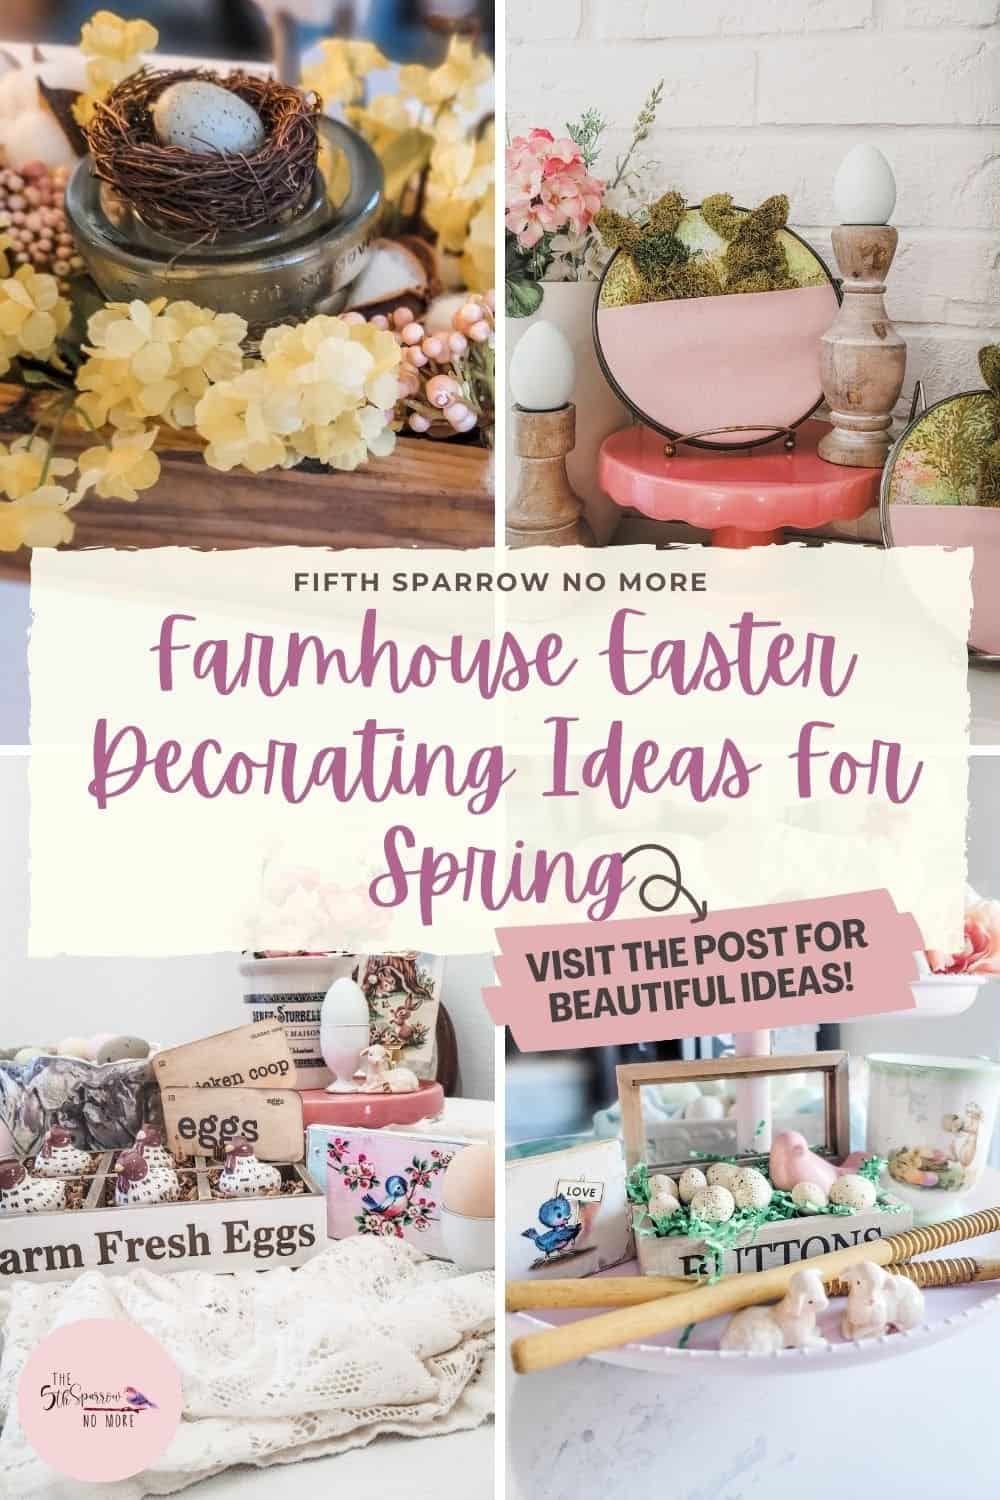 Farmhouse easter decorating ideas for spring.